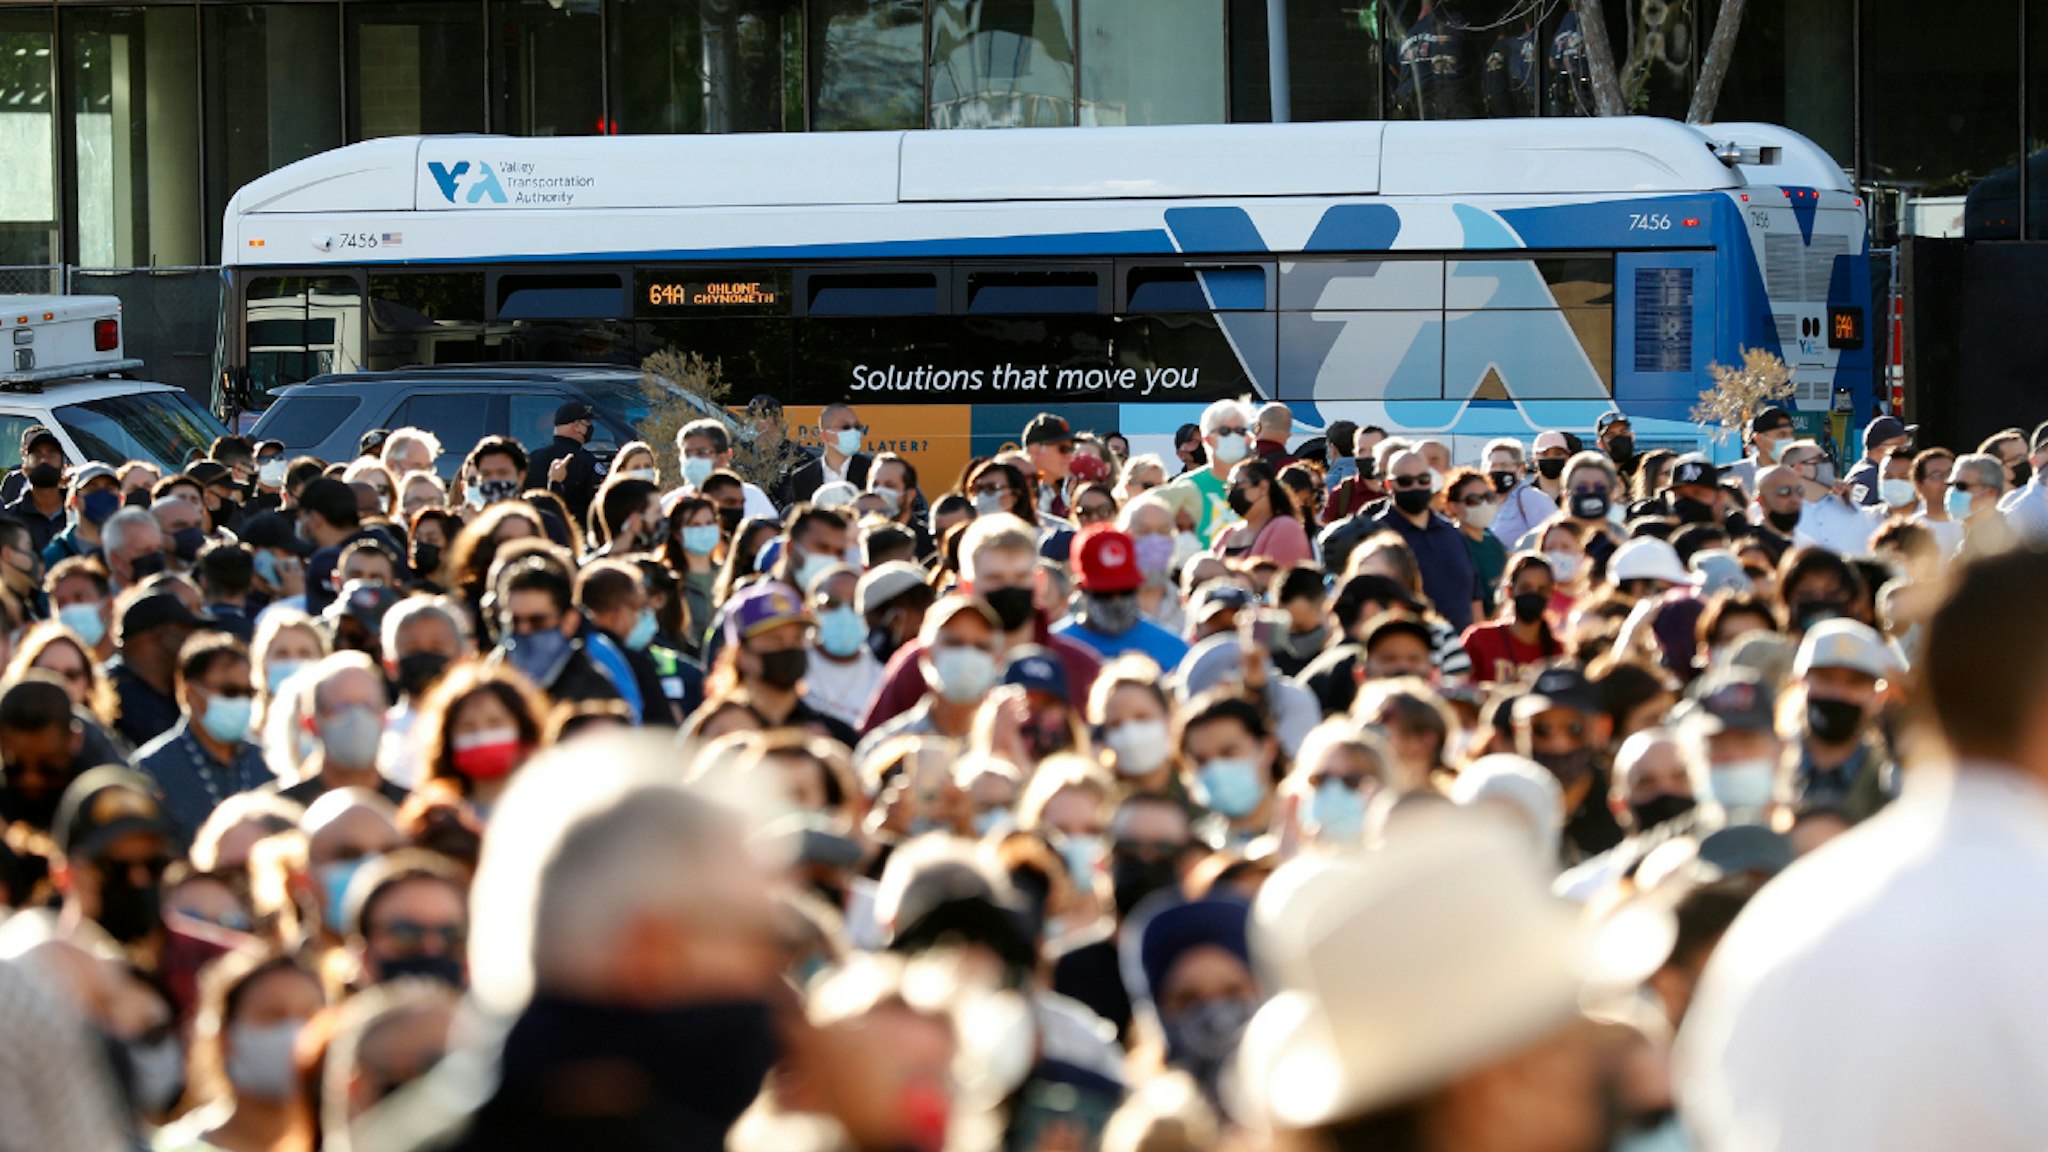 SAN JOSE - MAY 27: A VTA bus passes a public vigil on Thursday, May 27, 2021, at San Jose City Hall for victims of Wednesday's mass shooting at Valley Transportation Authority's maintenance yard in San Jose, Calif..